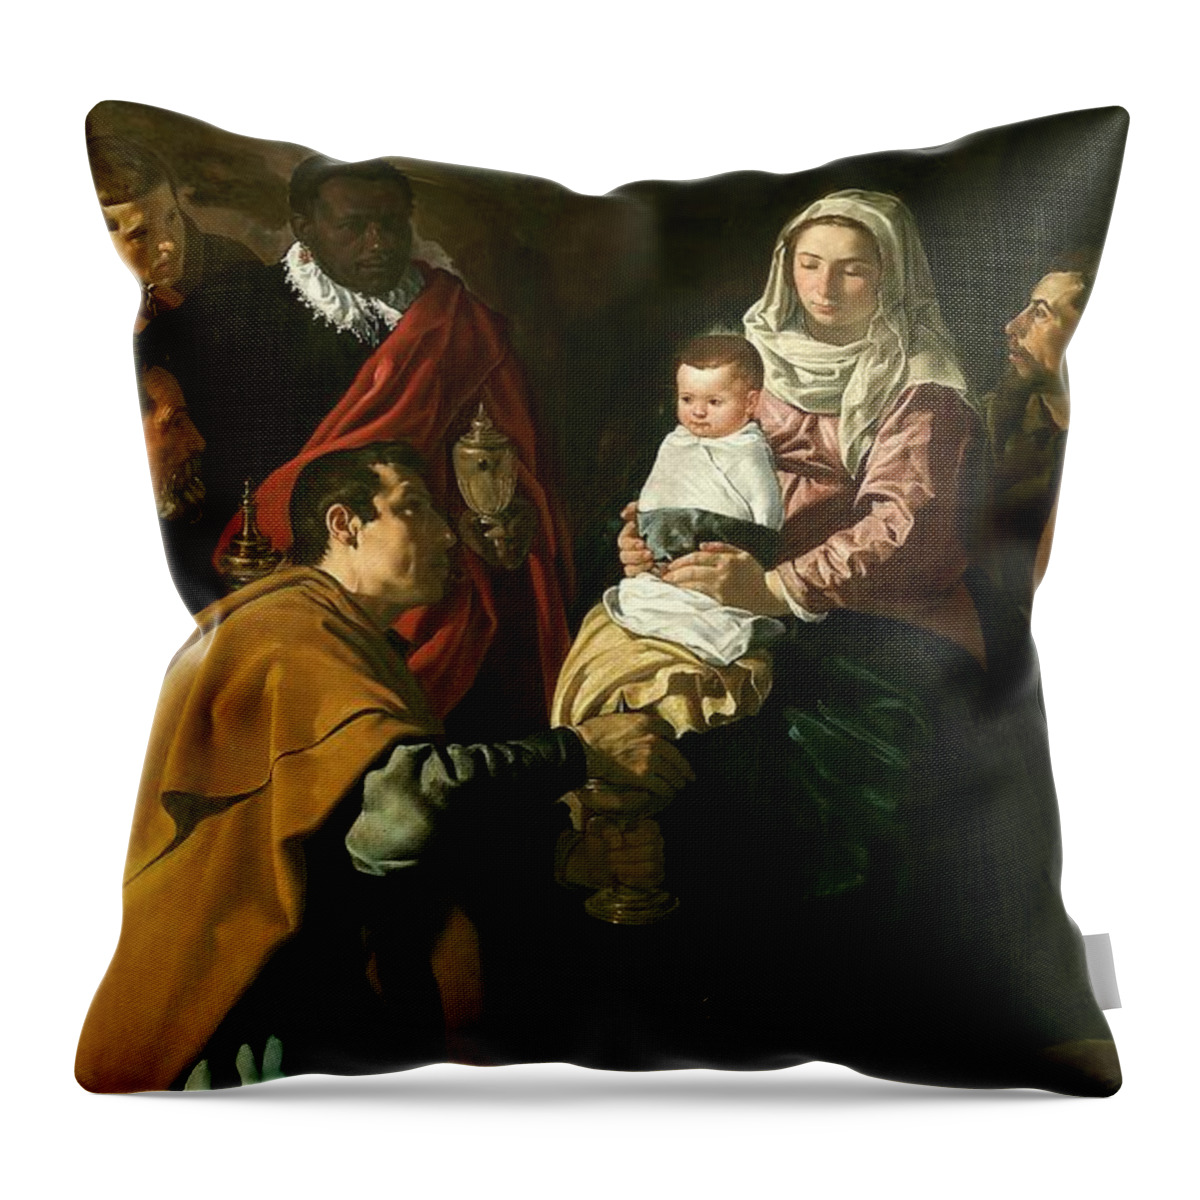 Adoration Of The Magi Throw Pillow featuring the painting Diego Rodriguez de Silva y Velazquez / 'Adoration of the Magi', 1619, Spanish School. SAINT JOSEPH. by Diego Velazquez -1599-1660-